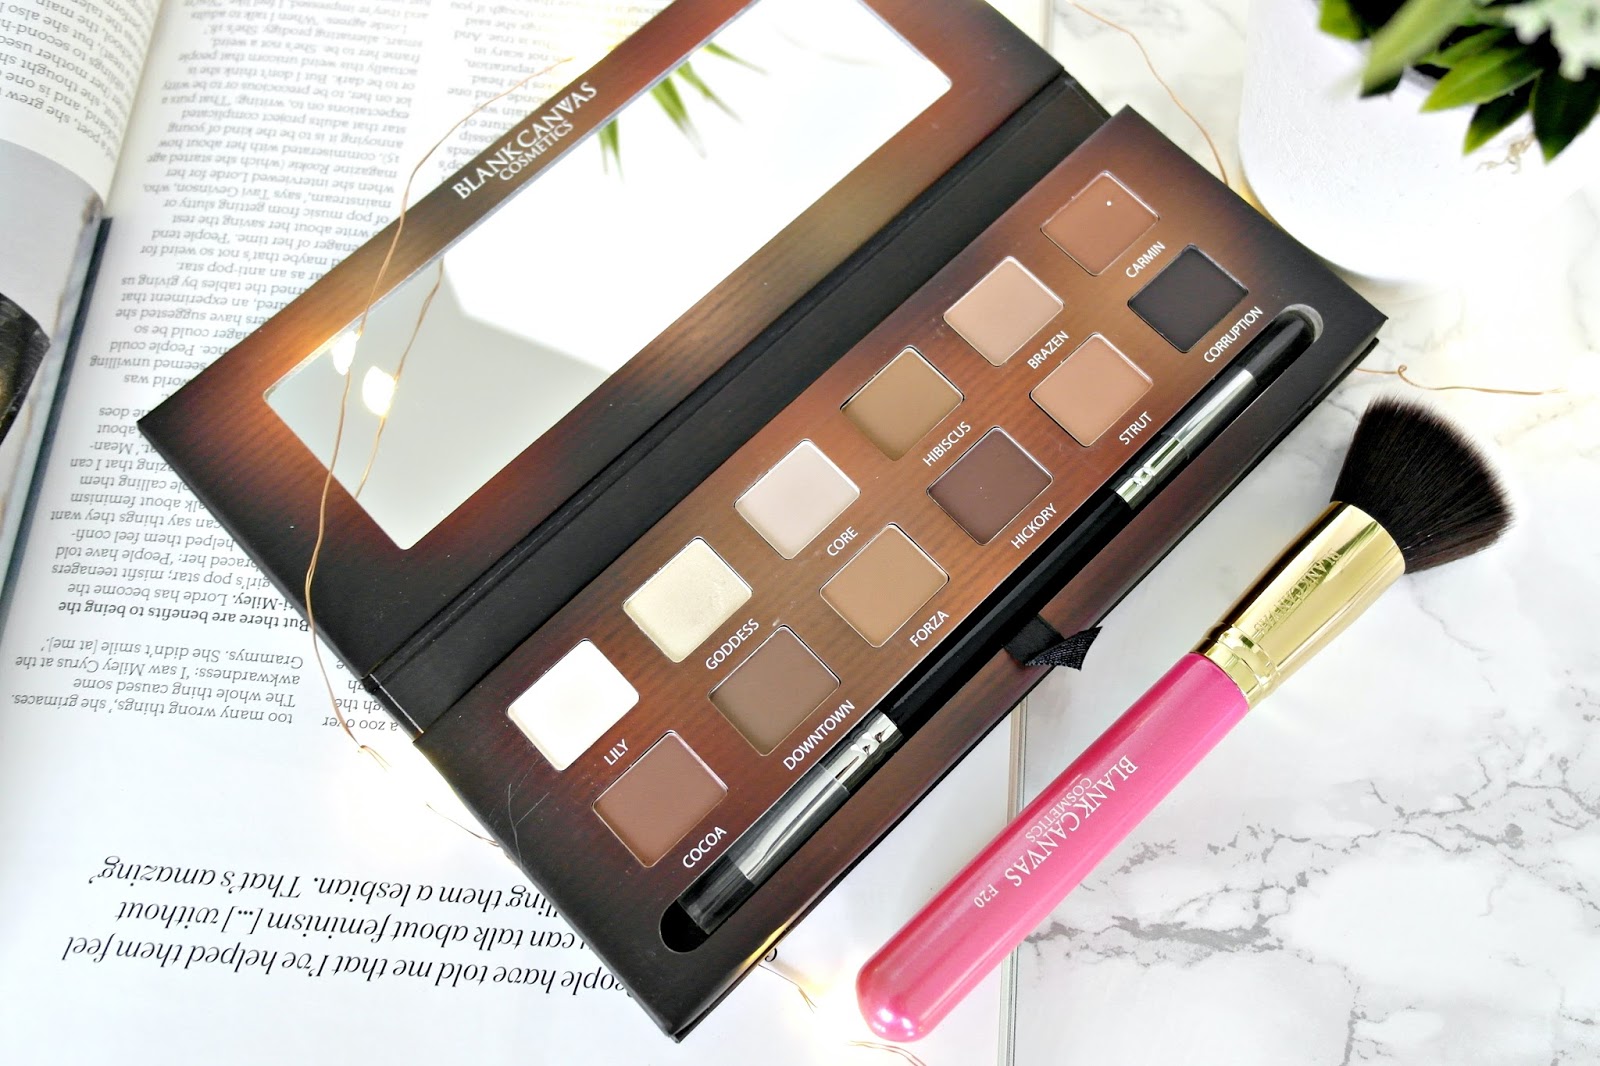 Blank Canvas Cosmetics master series 1 palette and F20 brush 